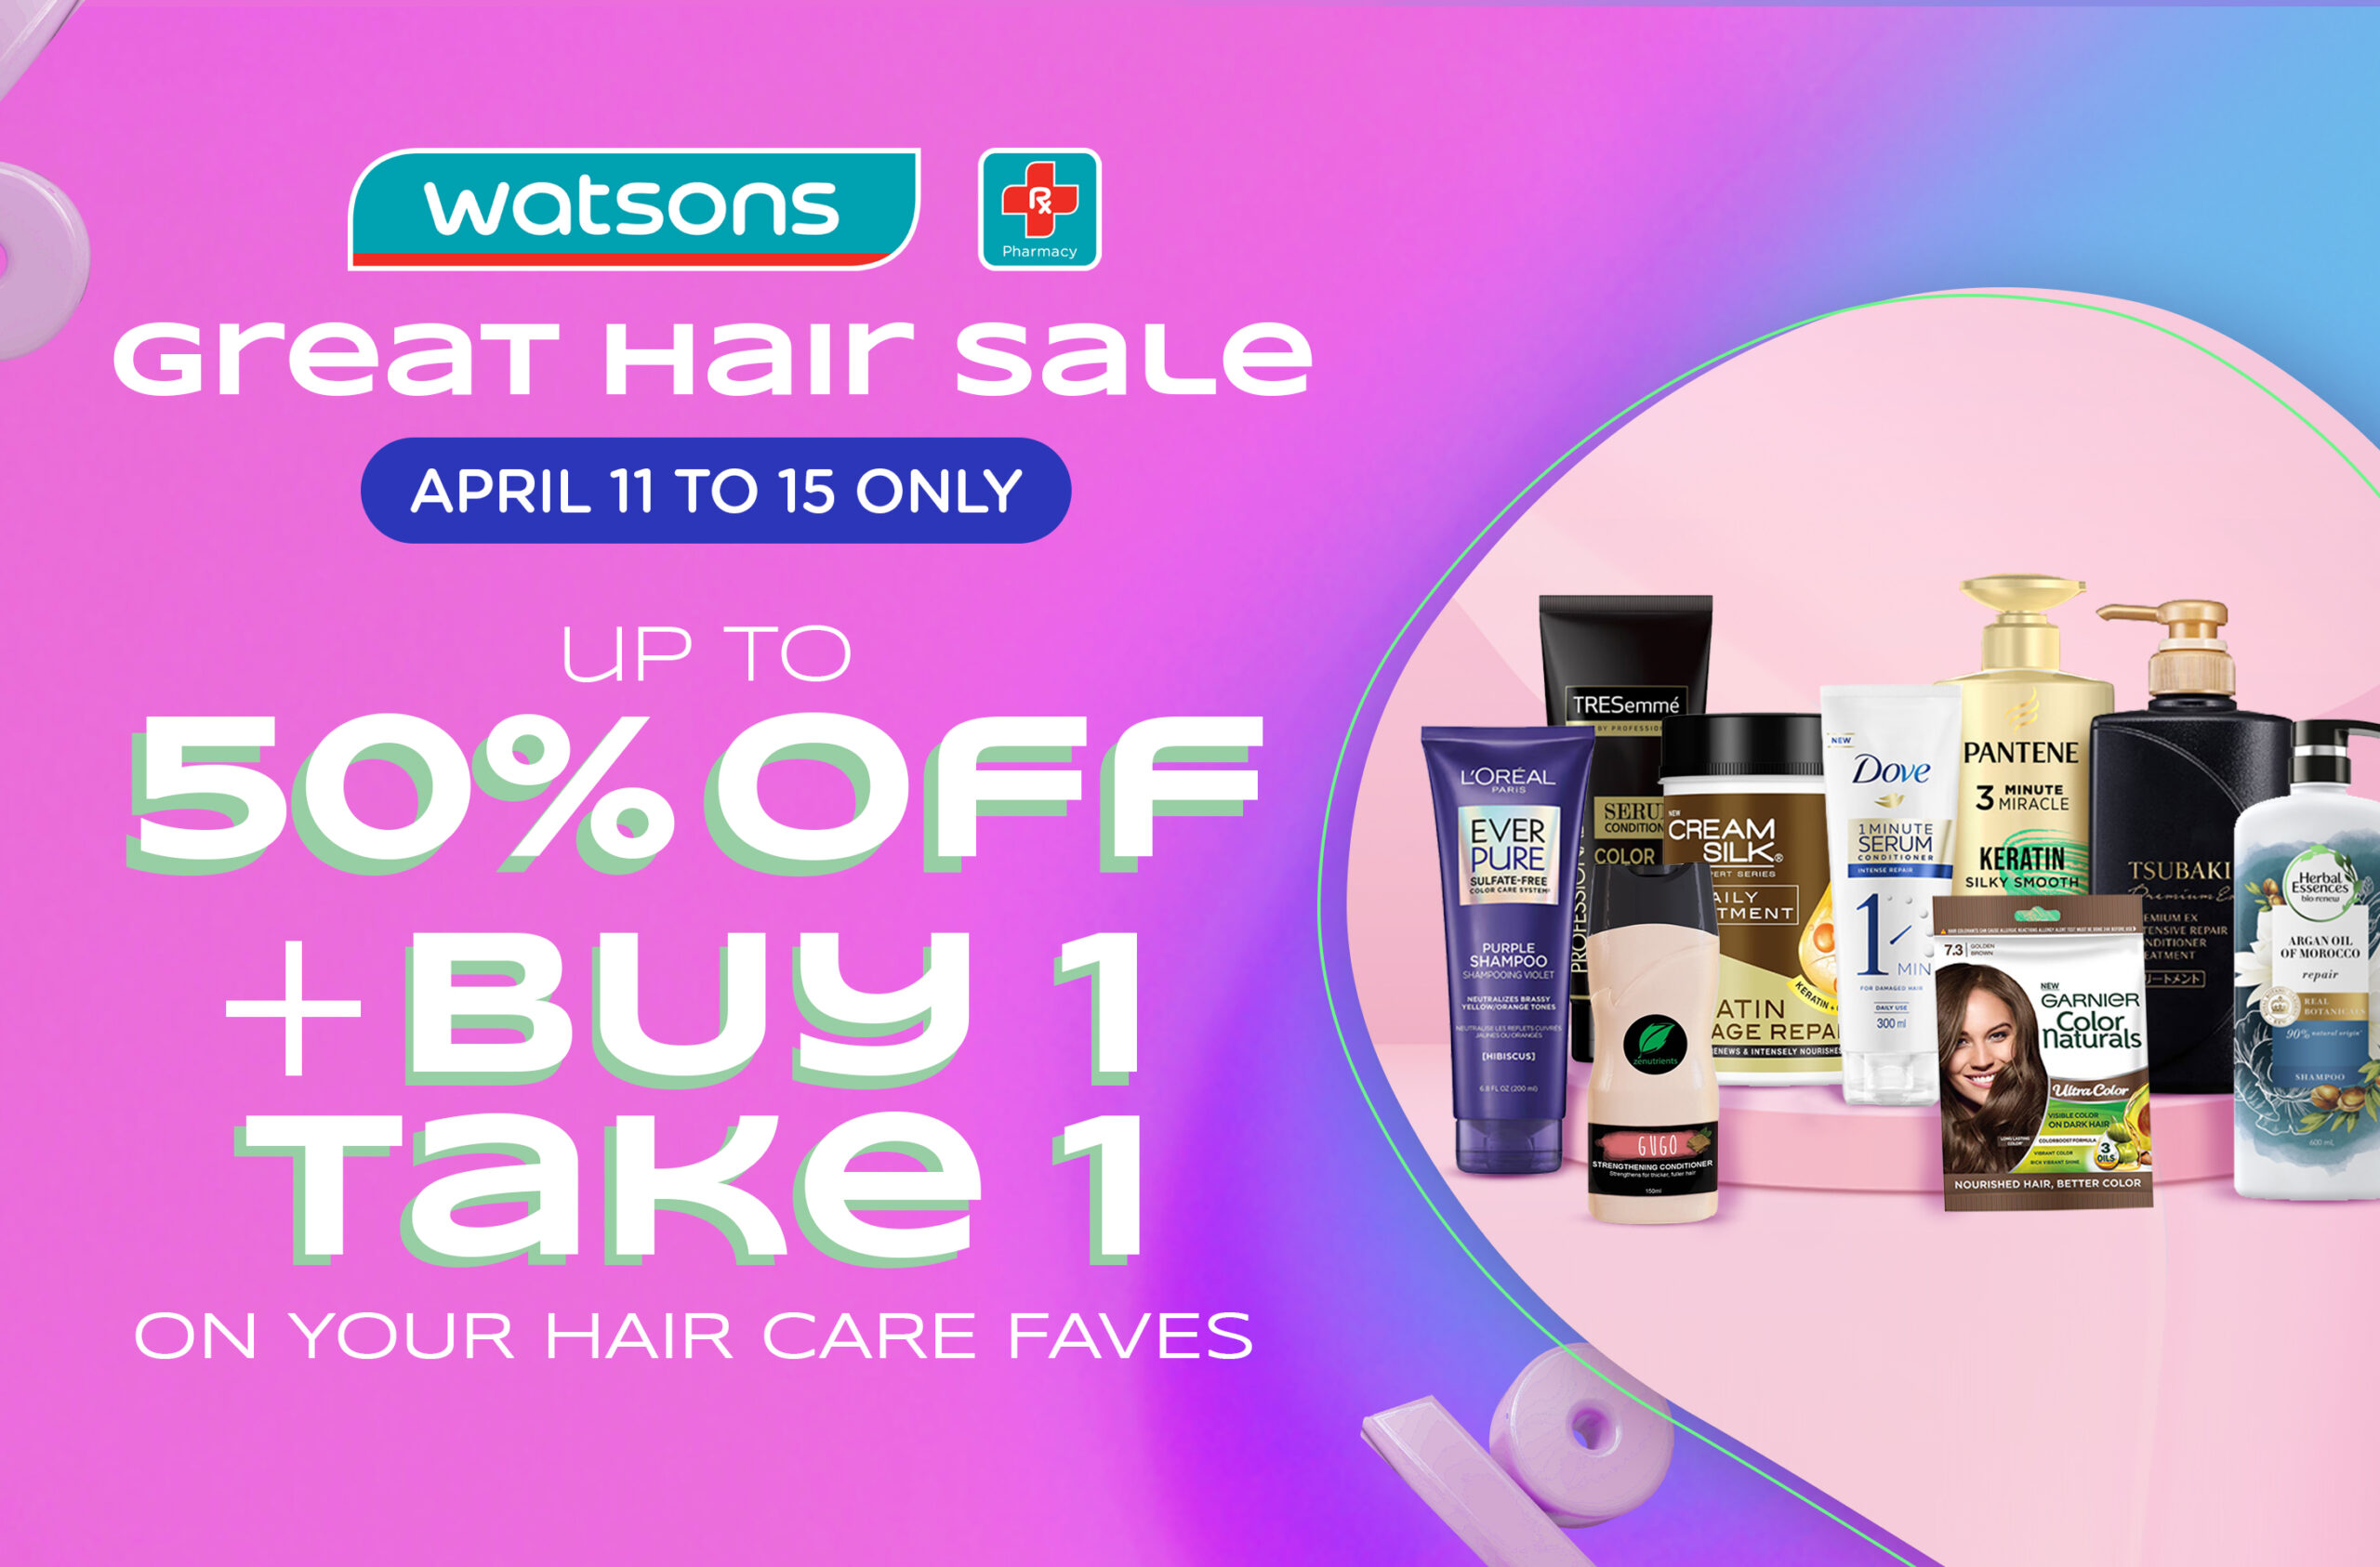 Watsons Massive Hair Sale &#8211; Up to 50% Off &amp; Buy 1 Get 1 Free!